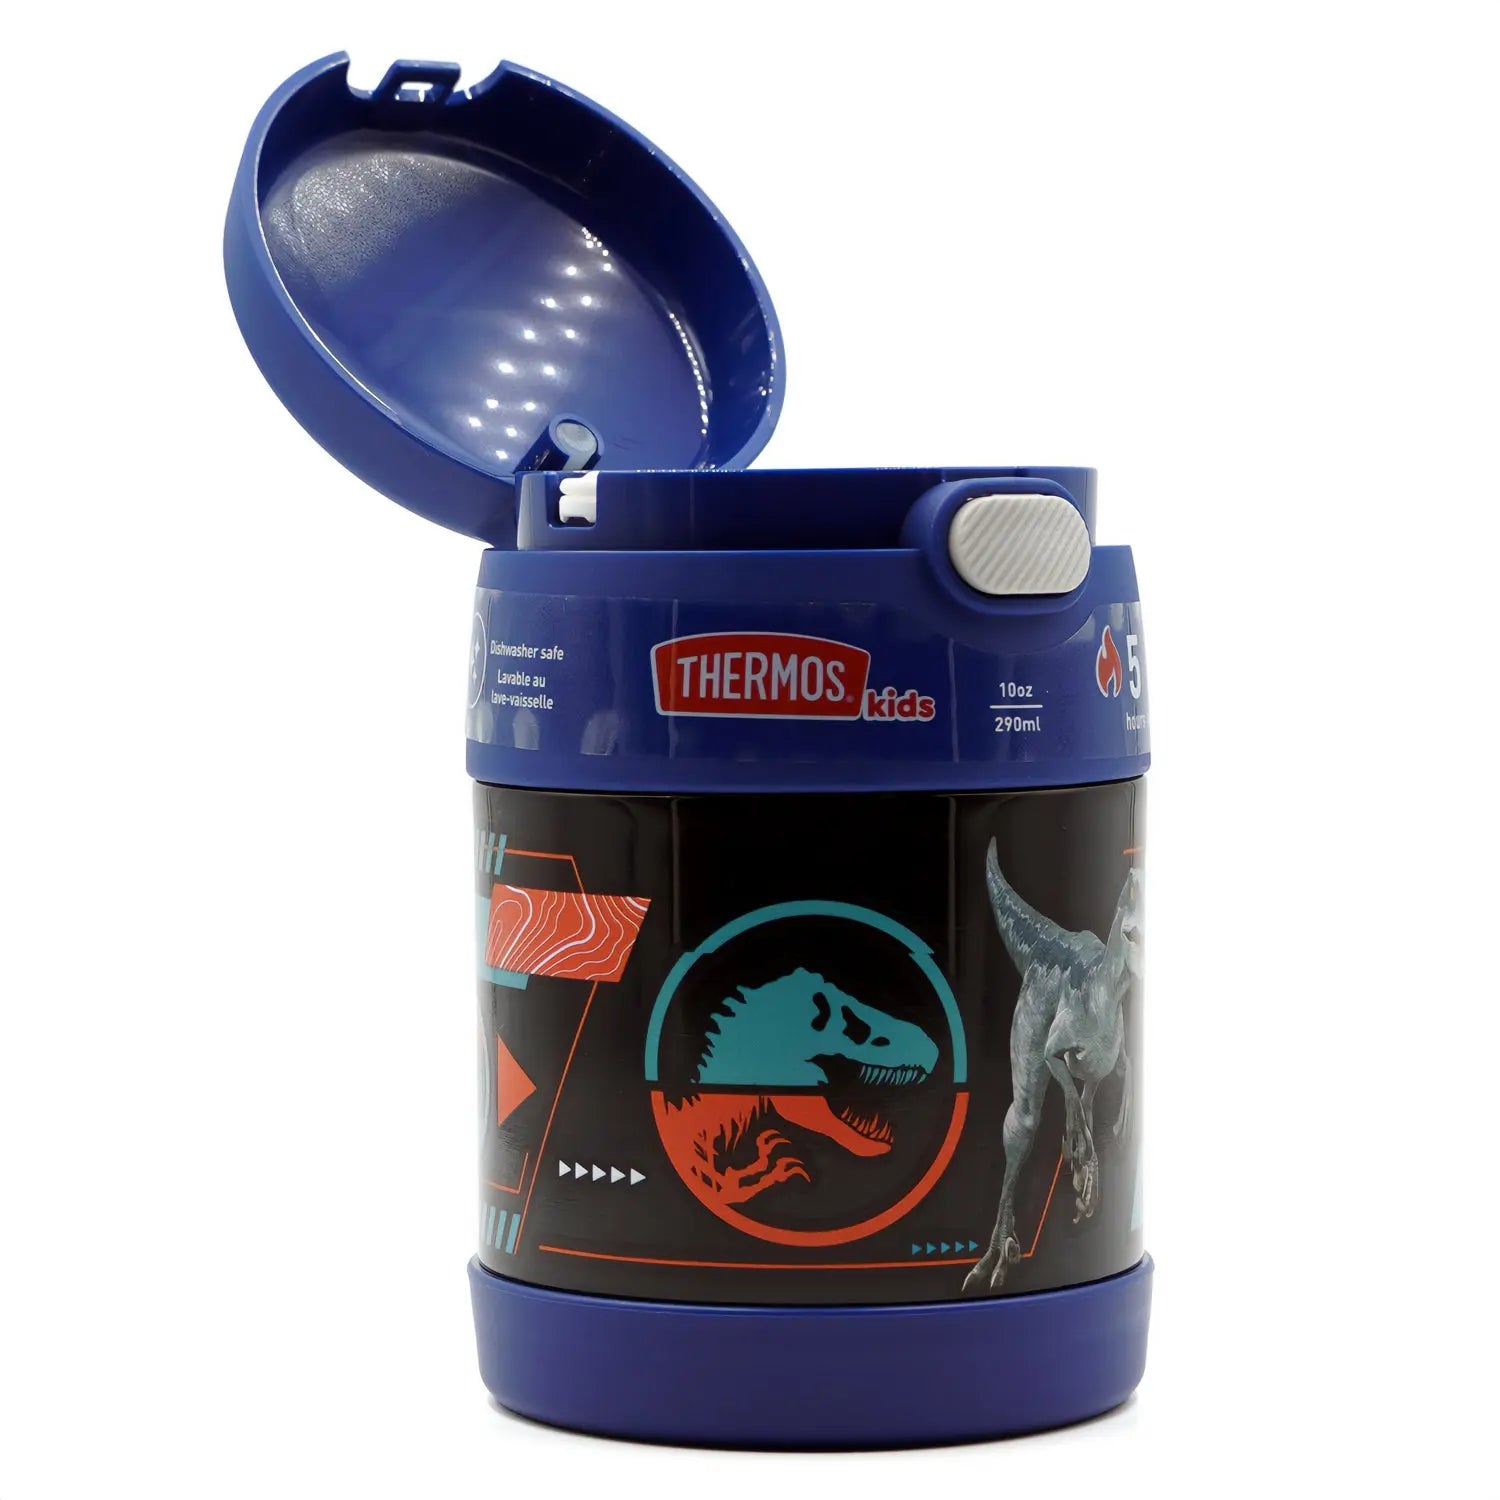 Thermos 10 oz. Kid's Funtainer Stainless Food Jar with Spoon - Jurassic World Thermos